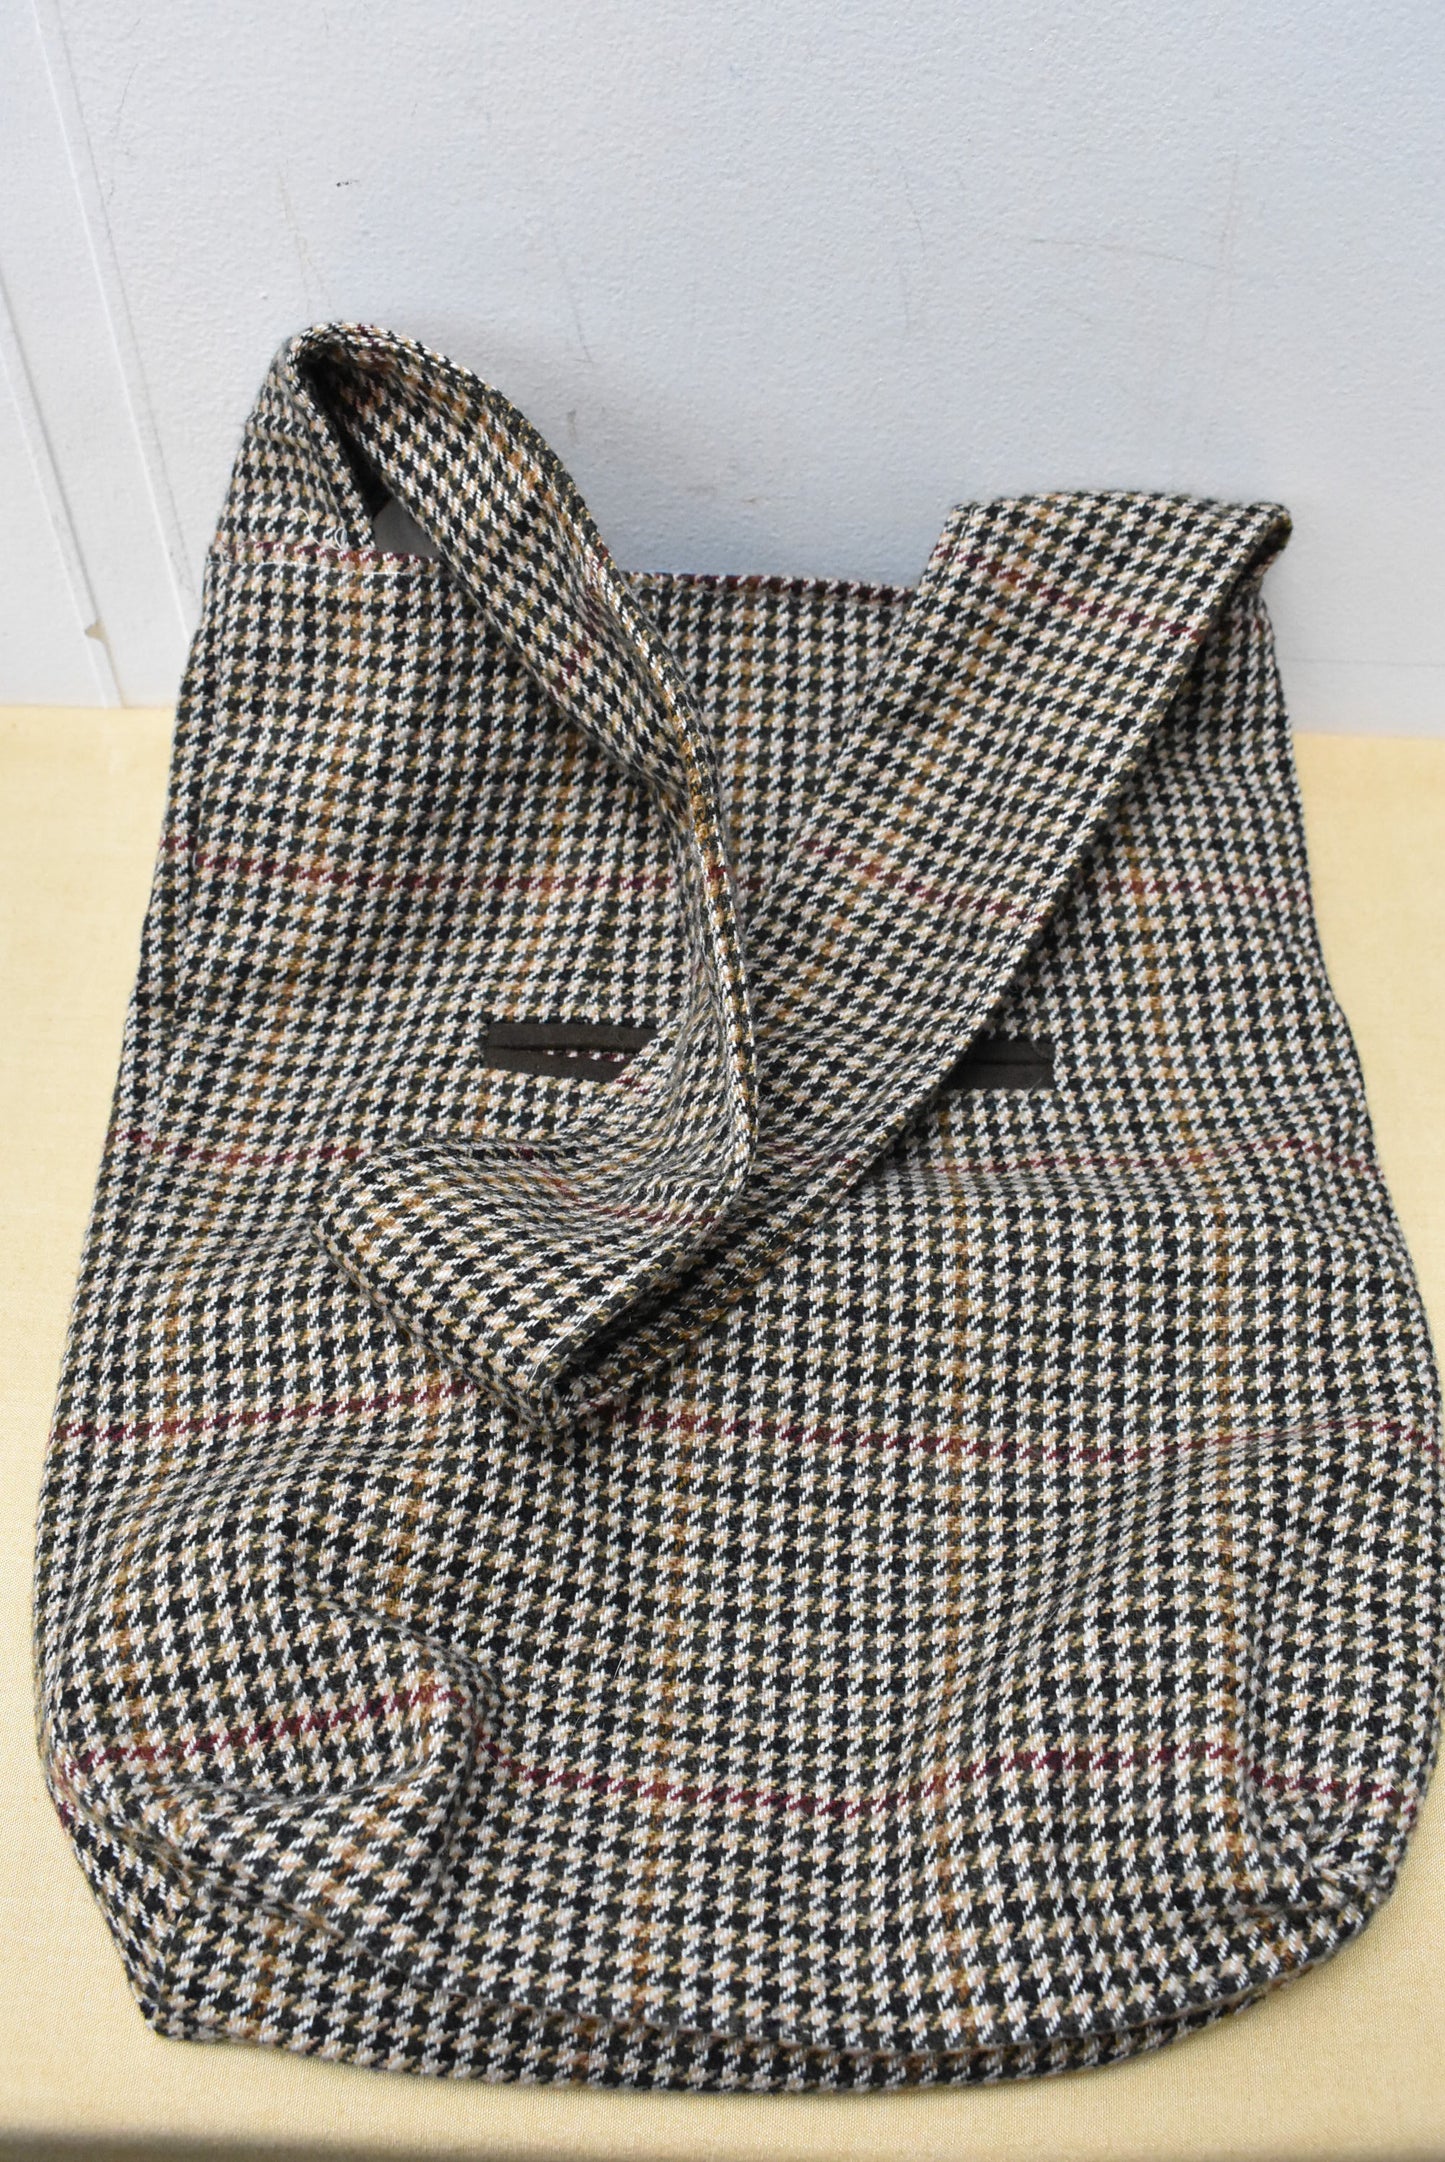 Houndstooth tote